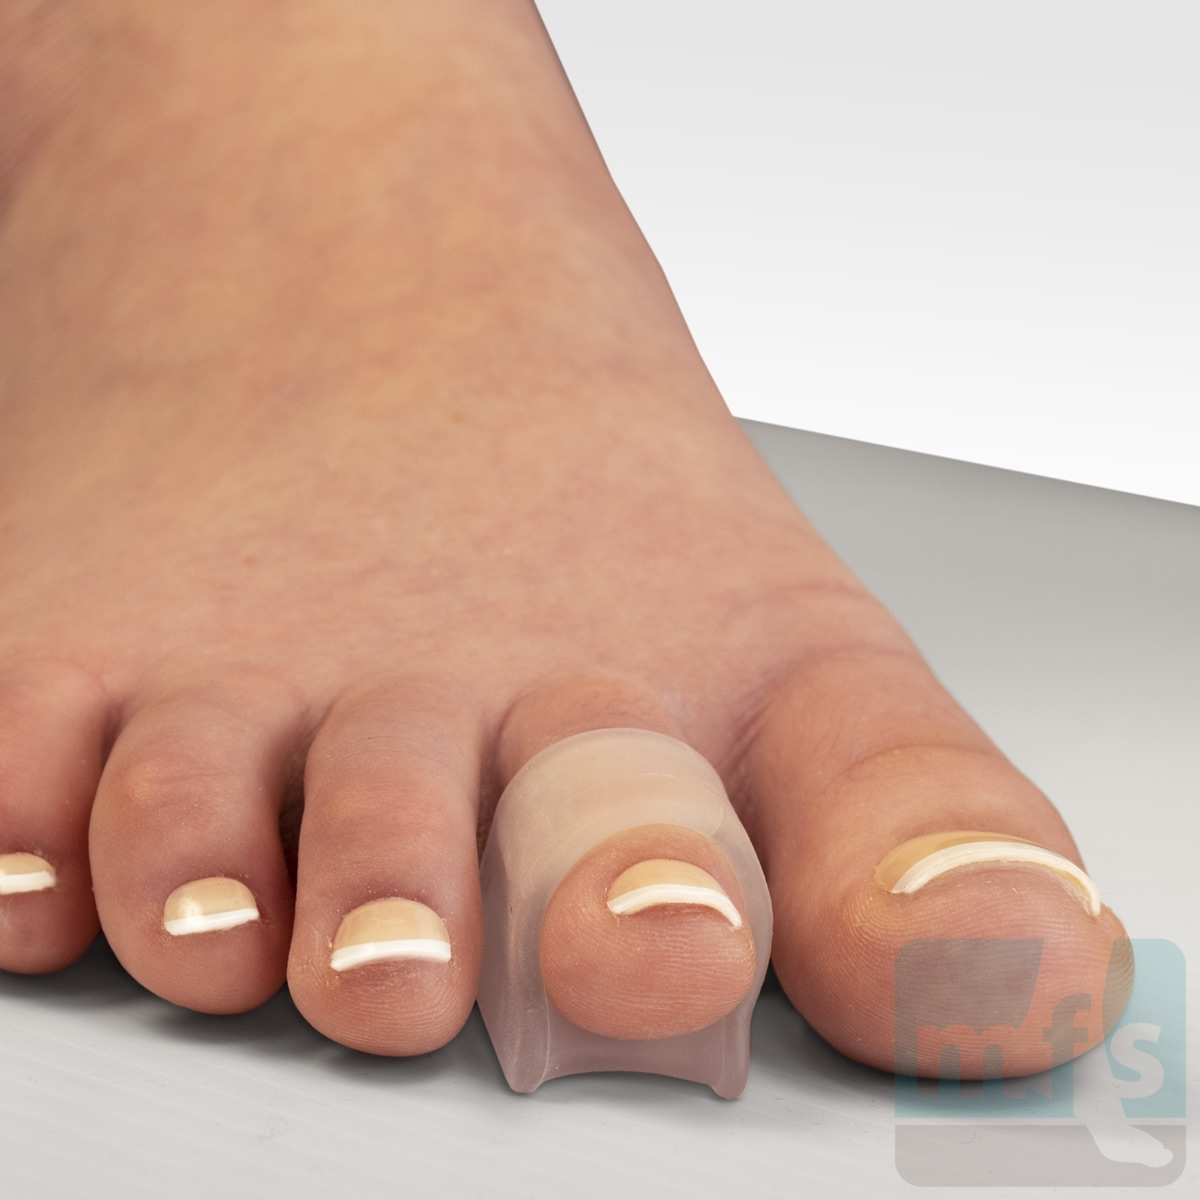 Hammer Toe: Causes, Symptoms, and Diagnosis